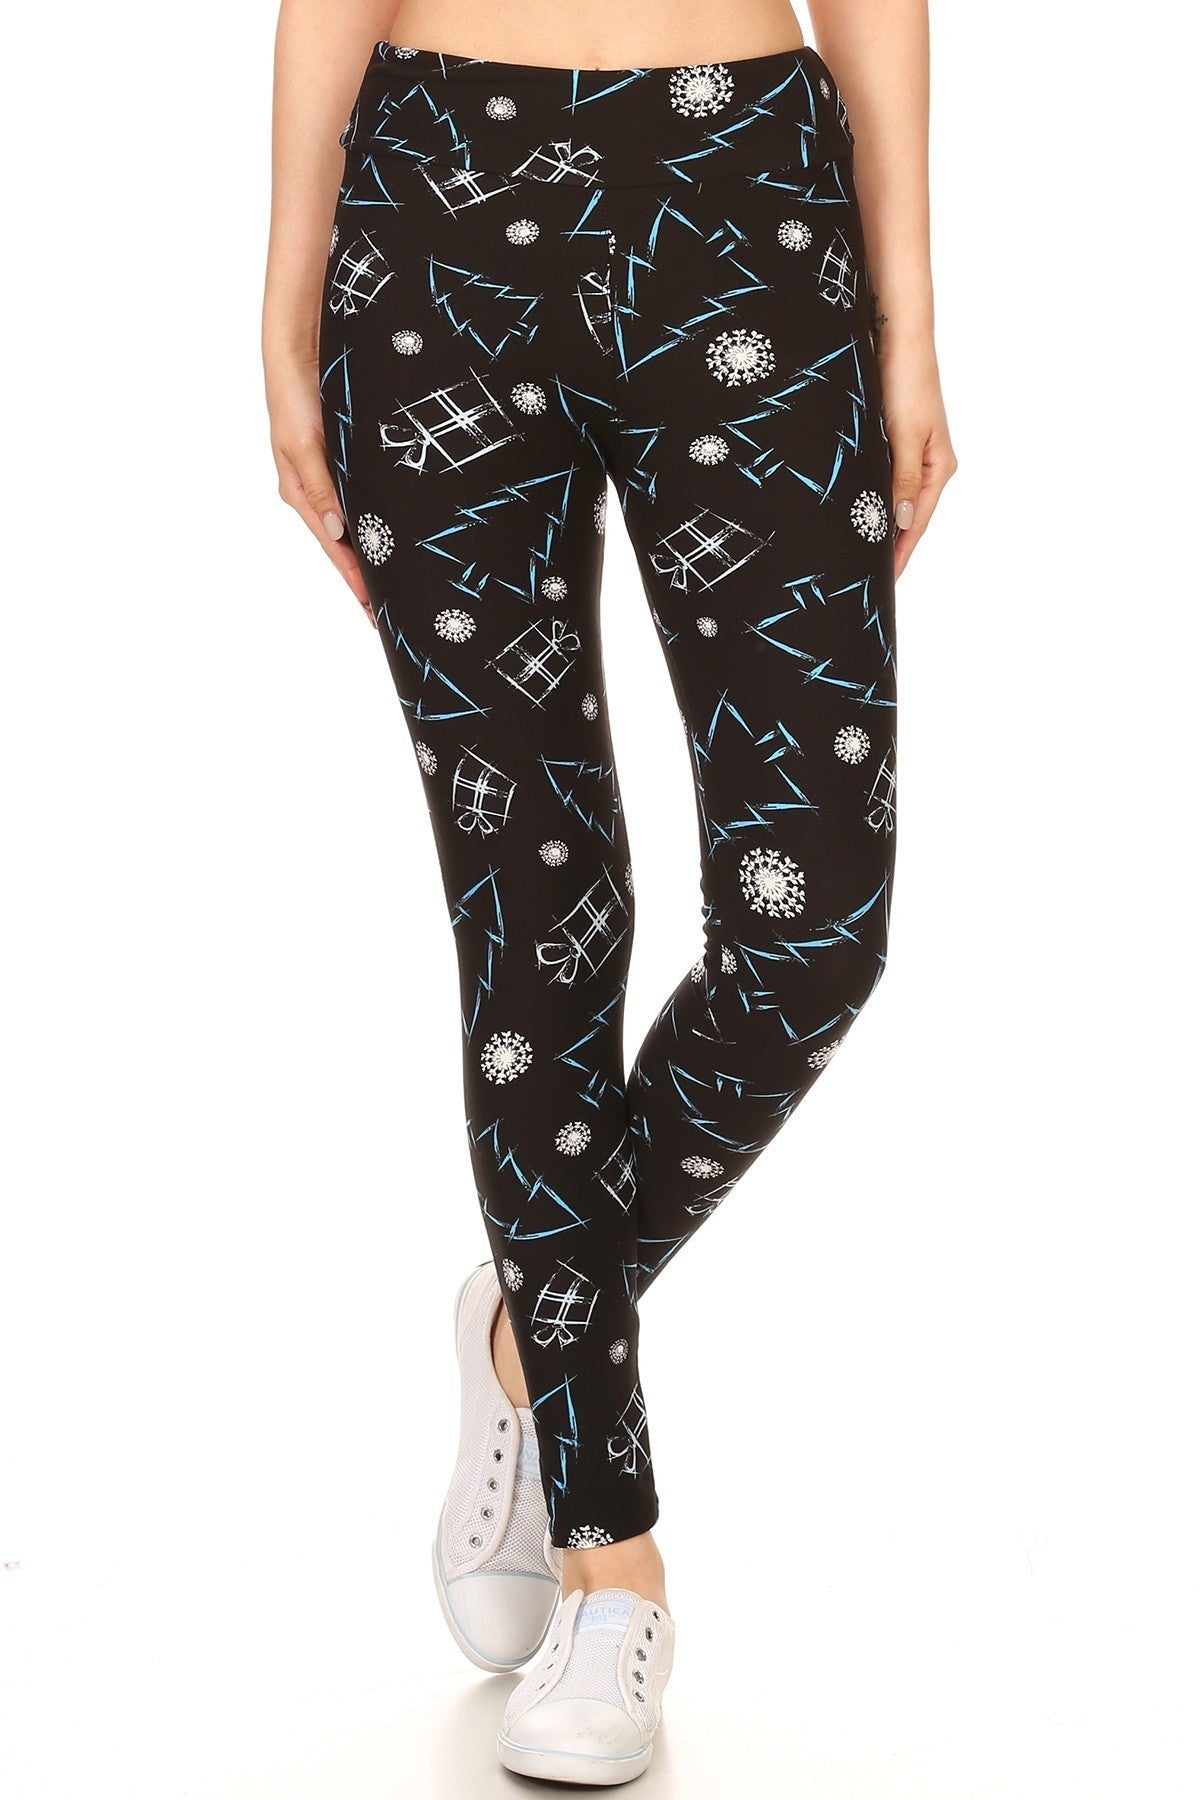 Yoga Style Banded Lined Tree Printed Knit Legging With High Waist Smile Sparker